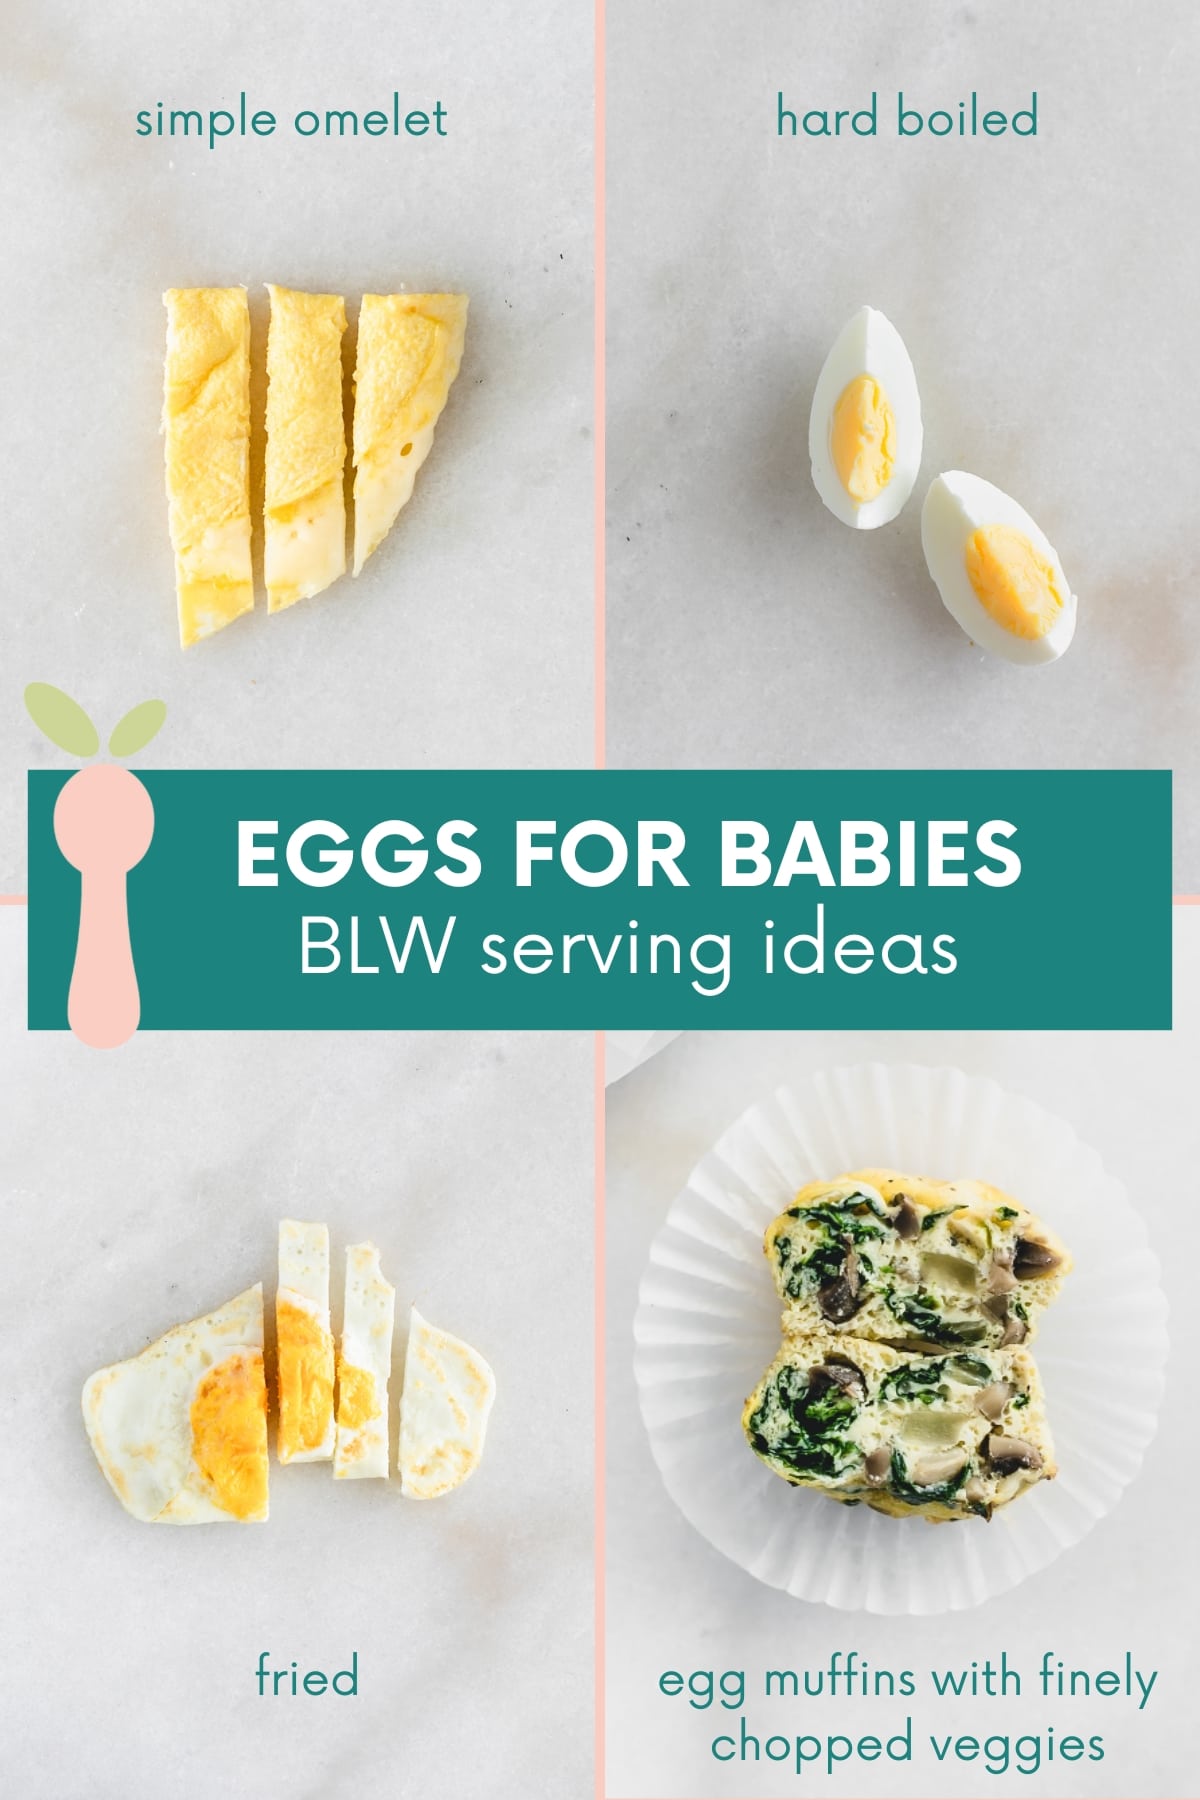 four image collage of different ideas for serving eggs to babies with text overlay.